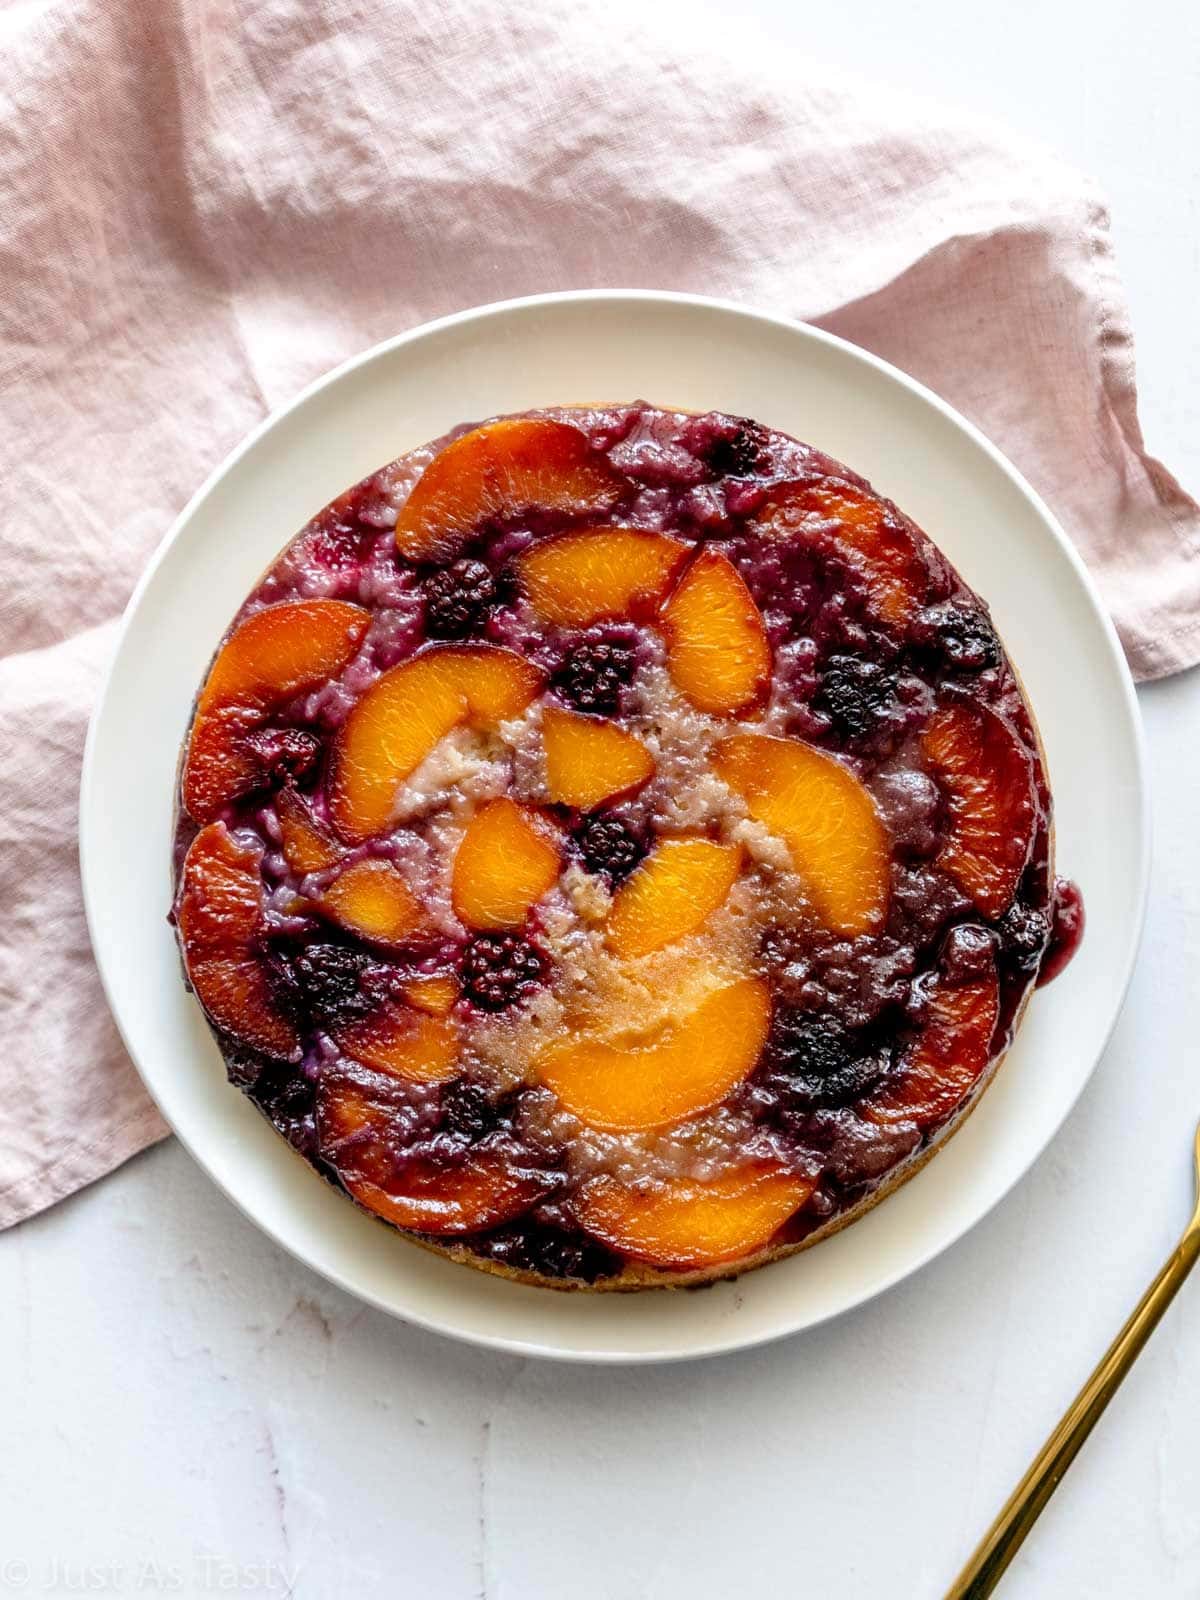 Juicy peach-upside down cake on a white plate.